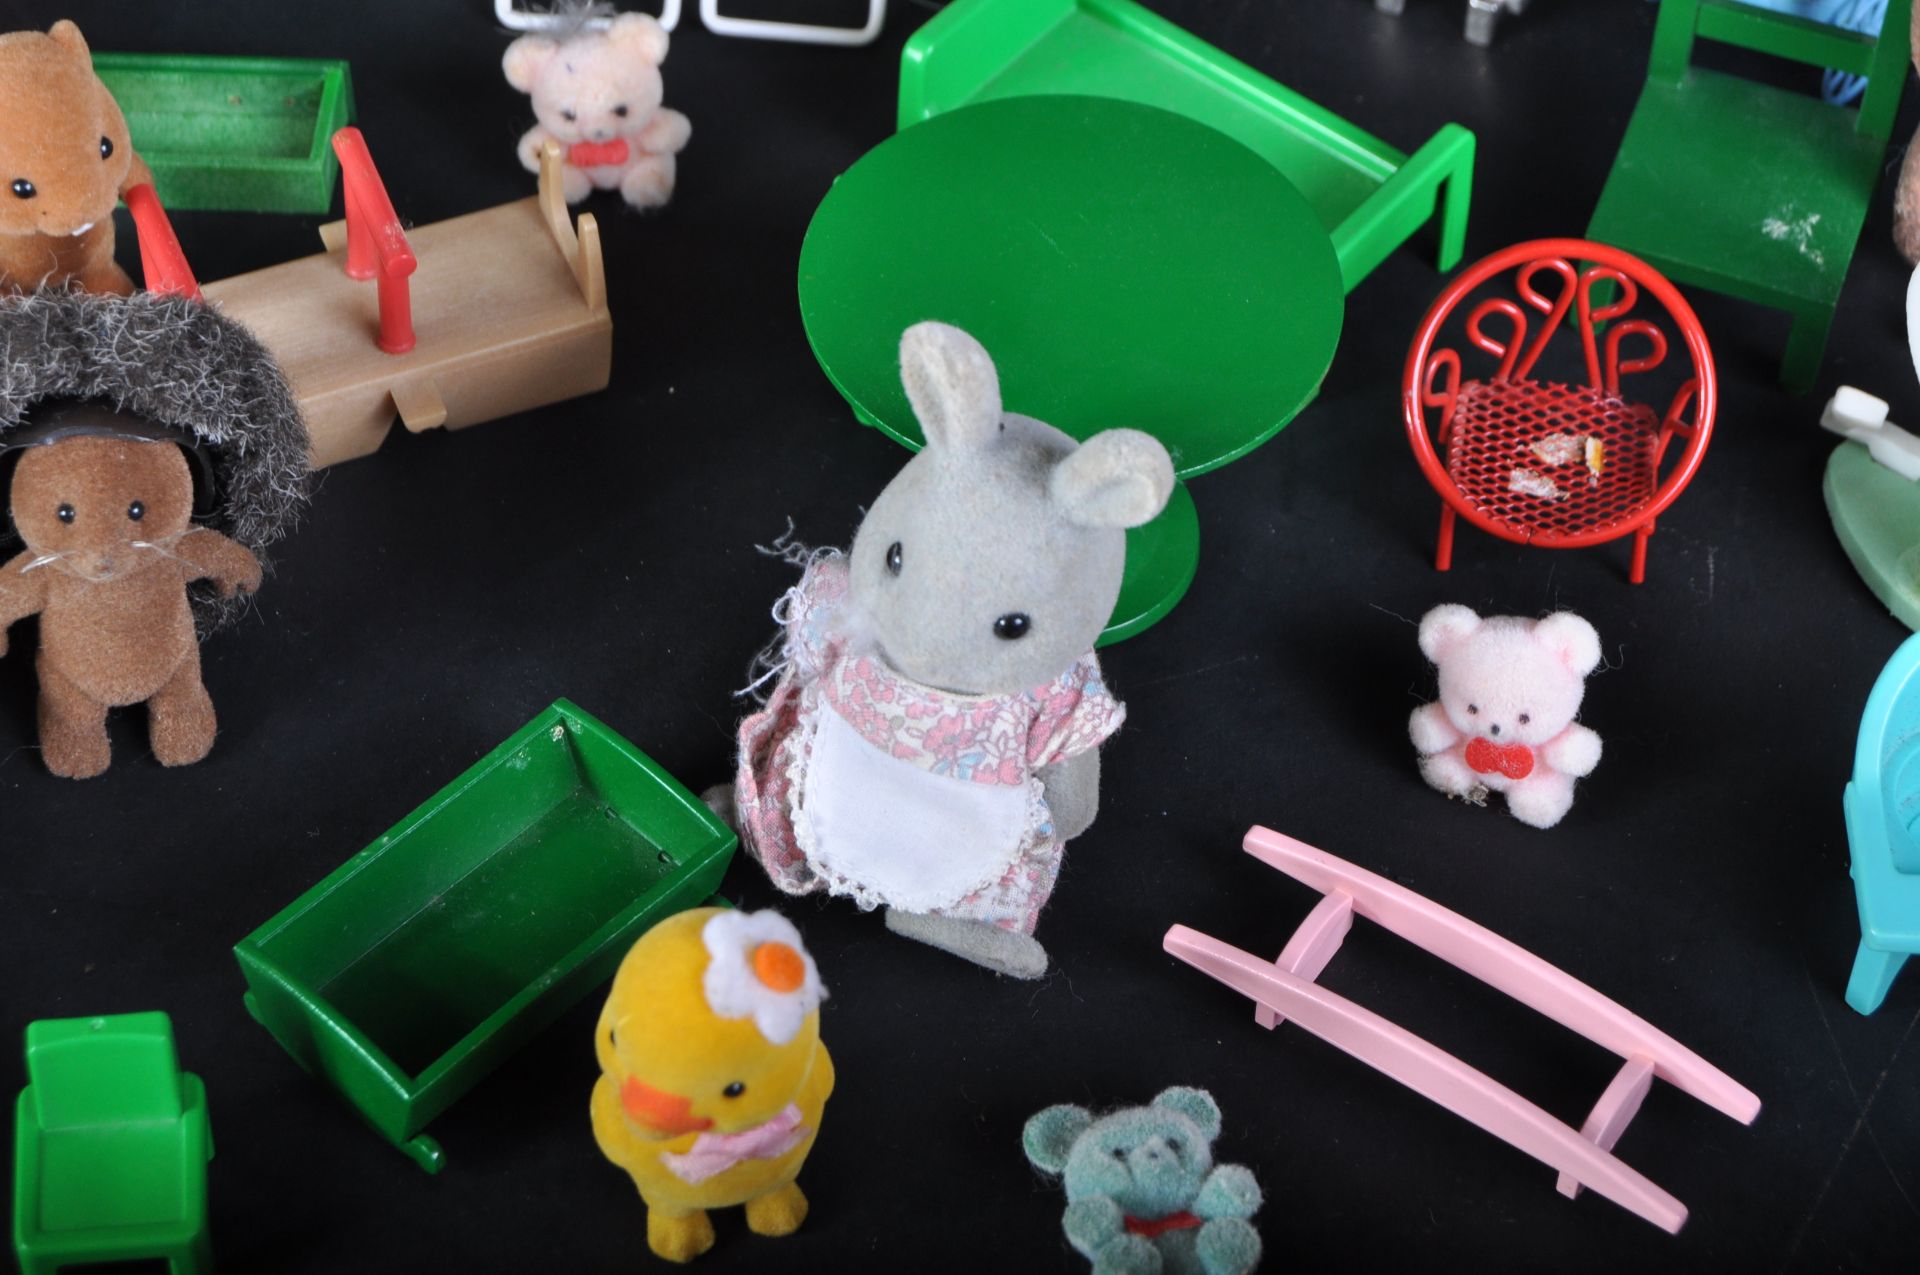 COLLECTION OF VINTAGE SYLVANIAN FAMILIES FIGURES & ACCESSORIES - Image 7 of 8